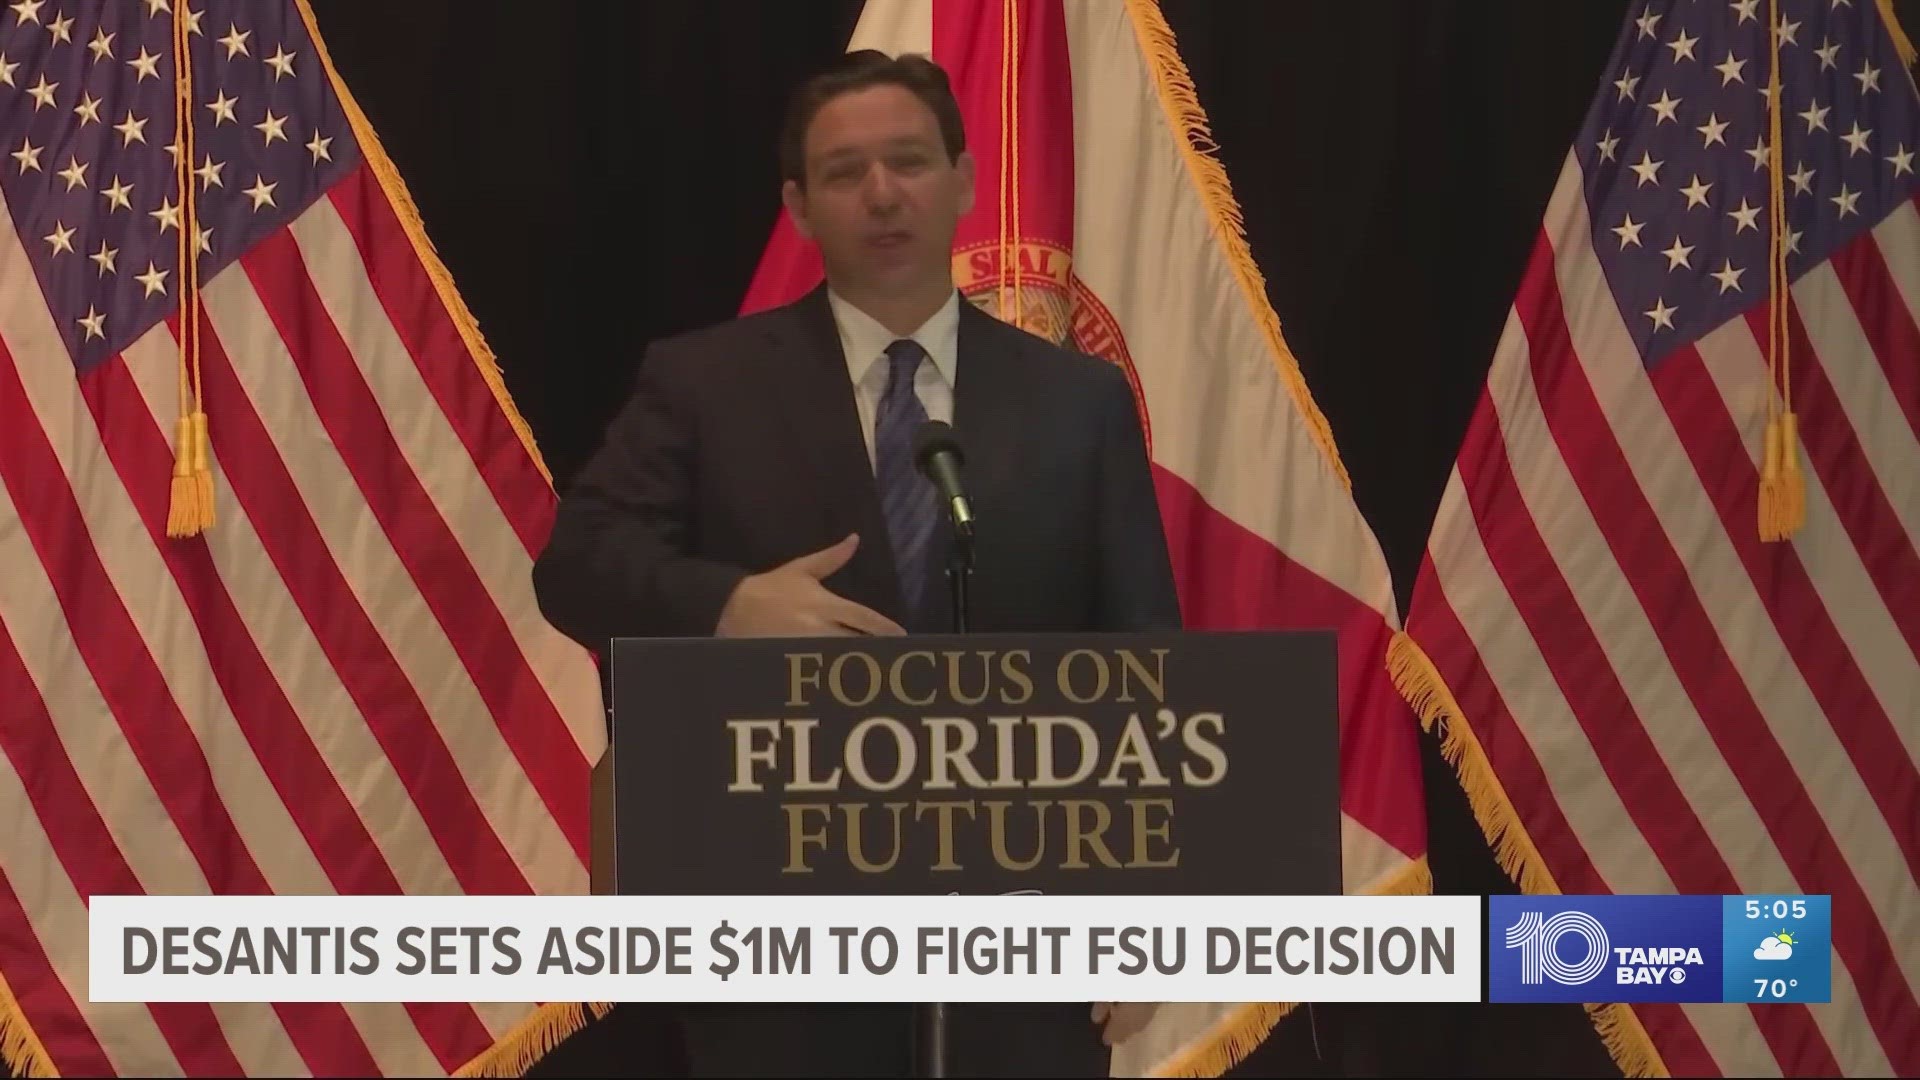 "It's unfortunate that we have to even do that, but we're going to put aside a million dollars and let the chips fall where they may on that," DeSantis said.